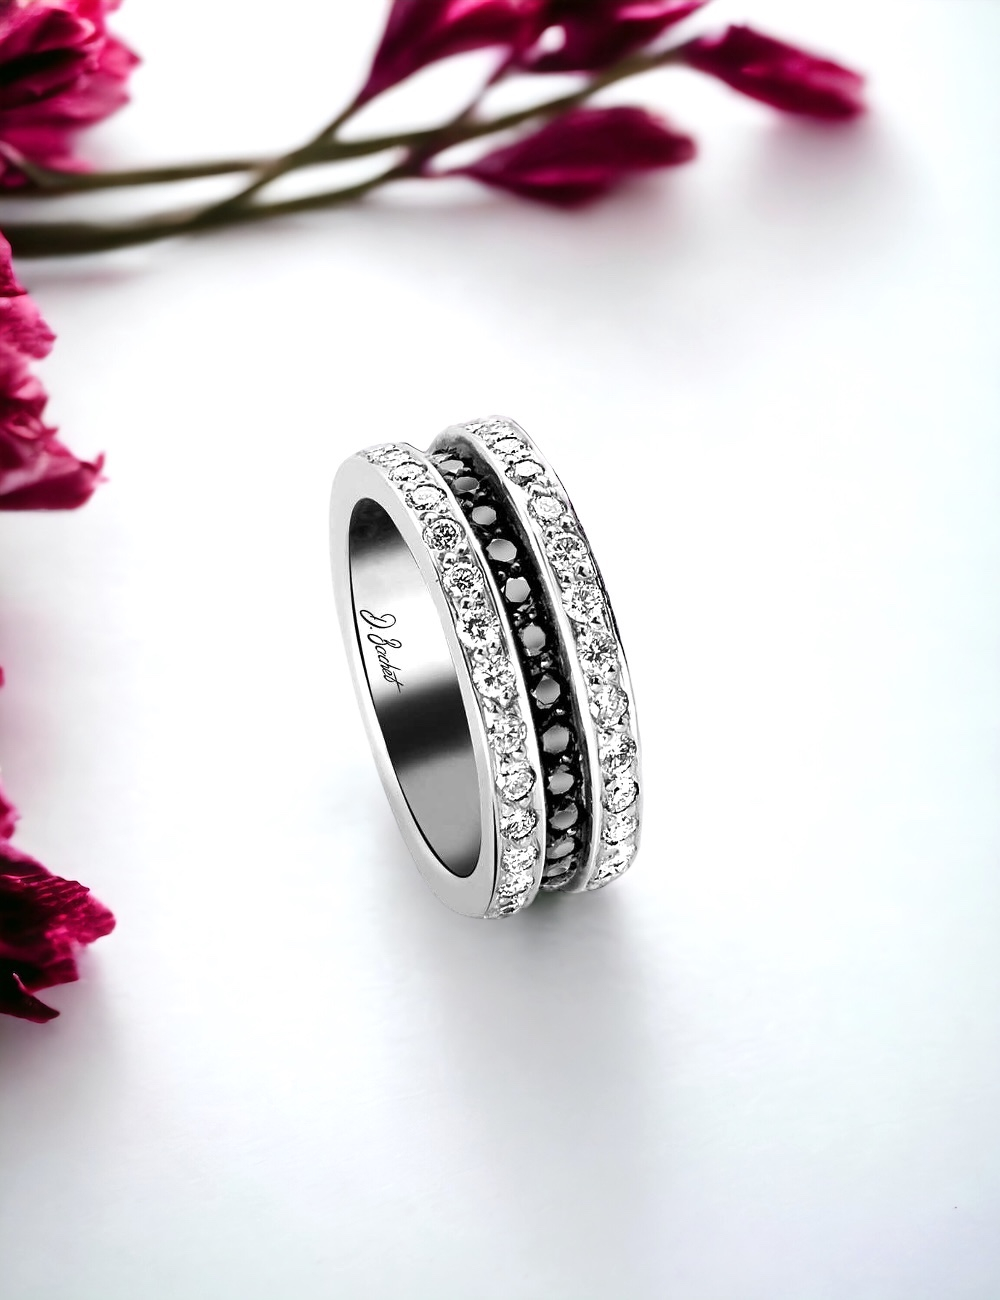 Scroll in Love platinum wedding band, 6mm, white and black diamonds, French craftsmanship by D.Bachet.